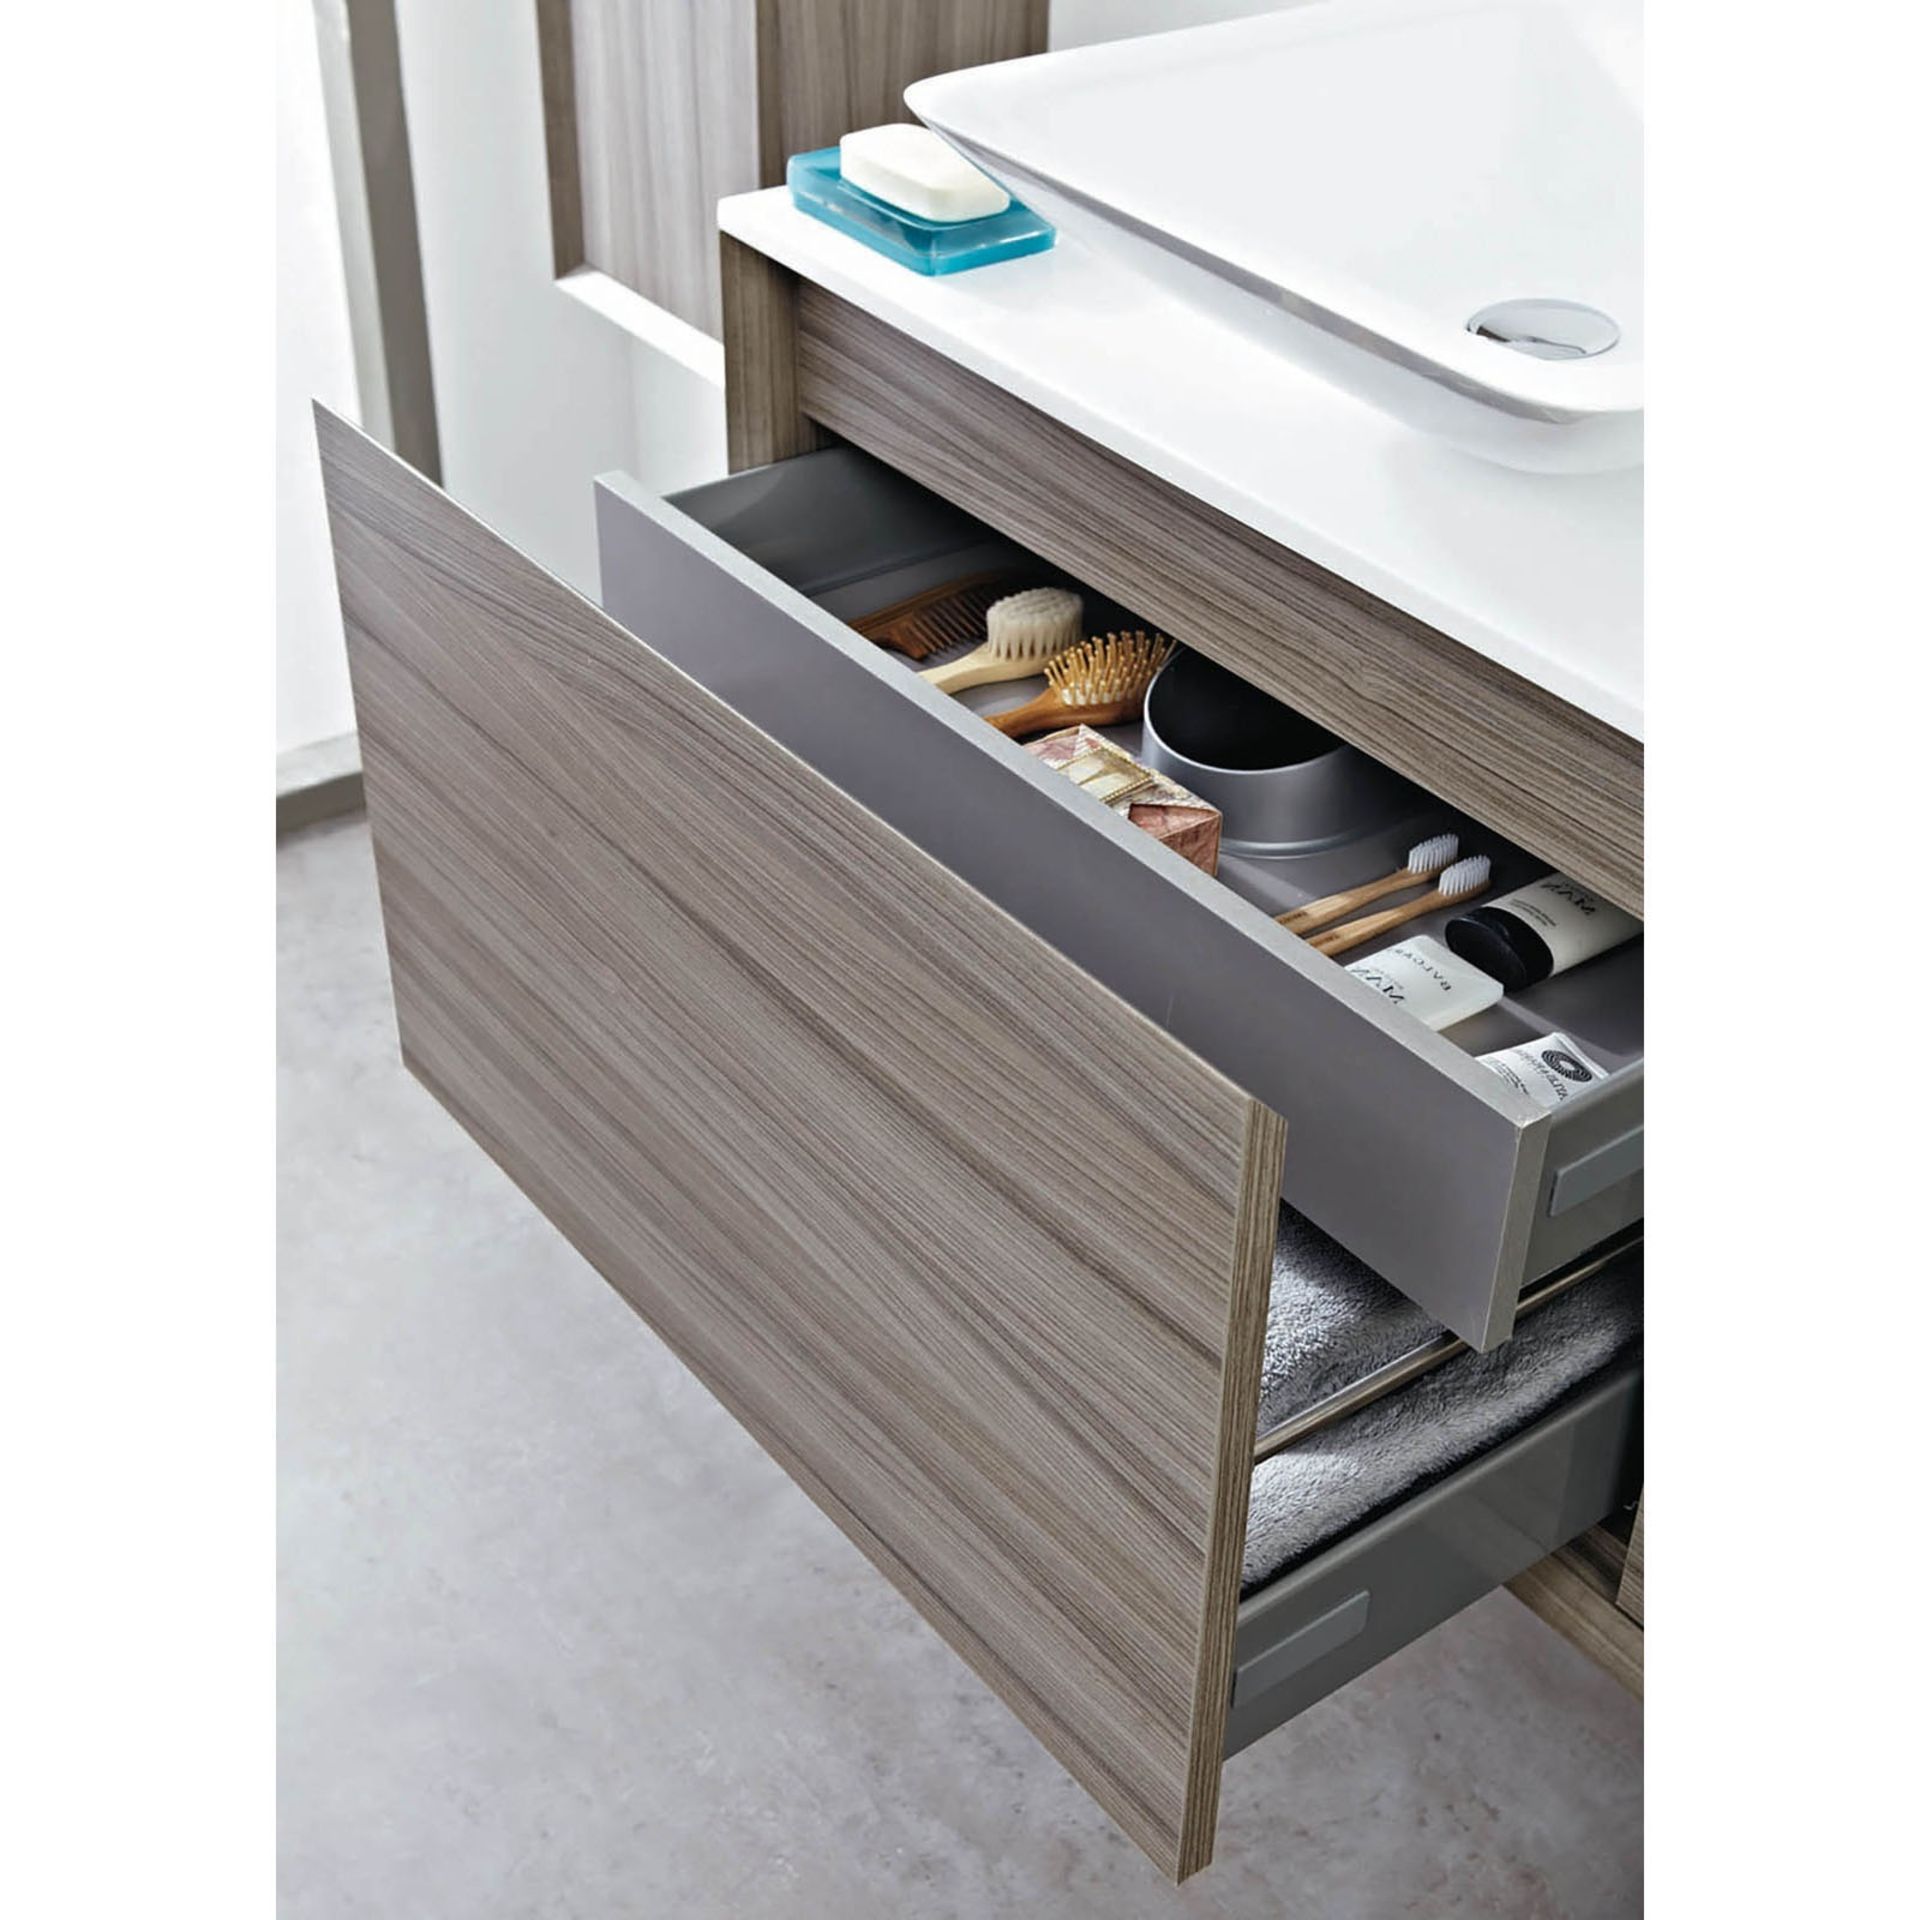 Enzo 1000 x 457 x 450mm designer wall hung vanity unit in Nilo finish with sparkling white solid su - Image 2 of 2